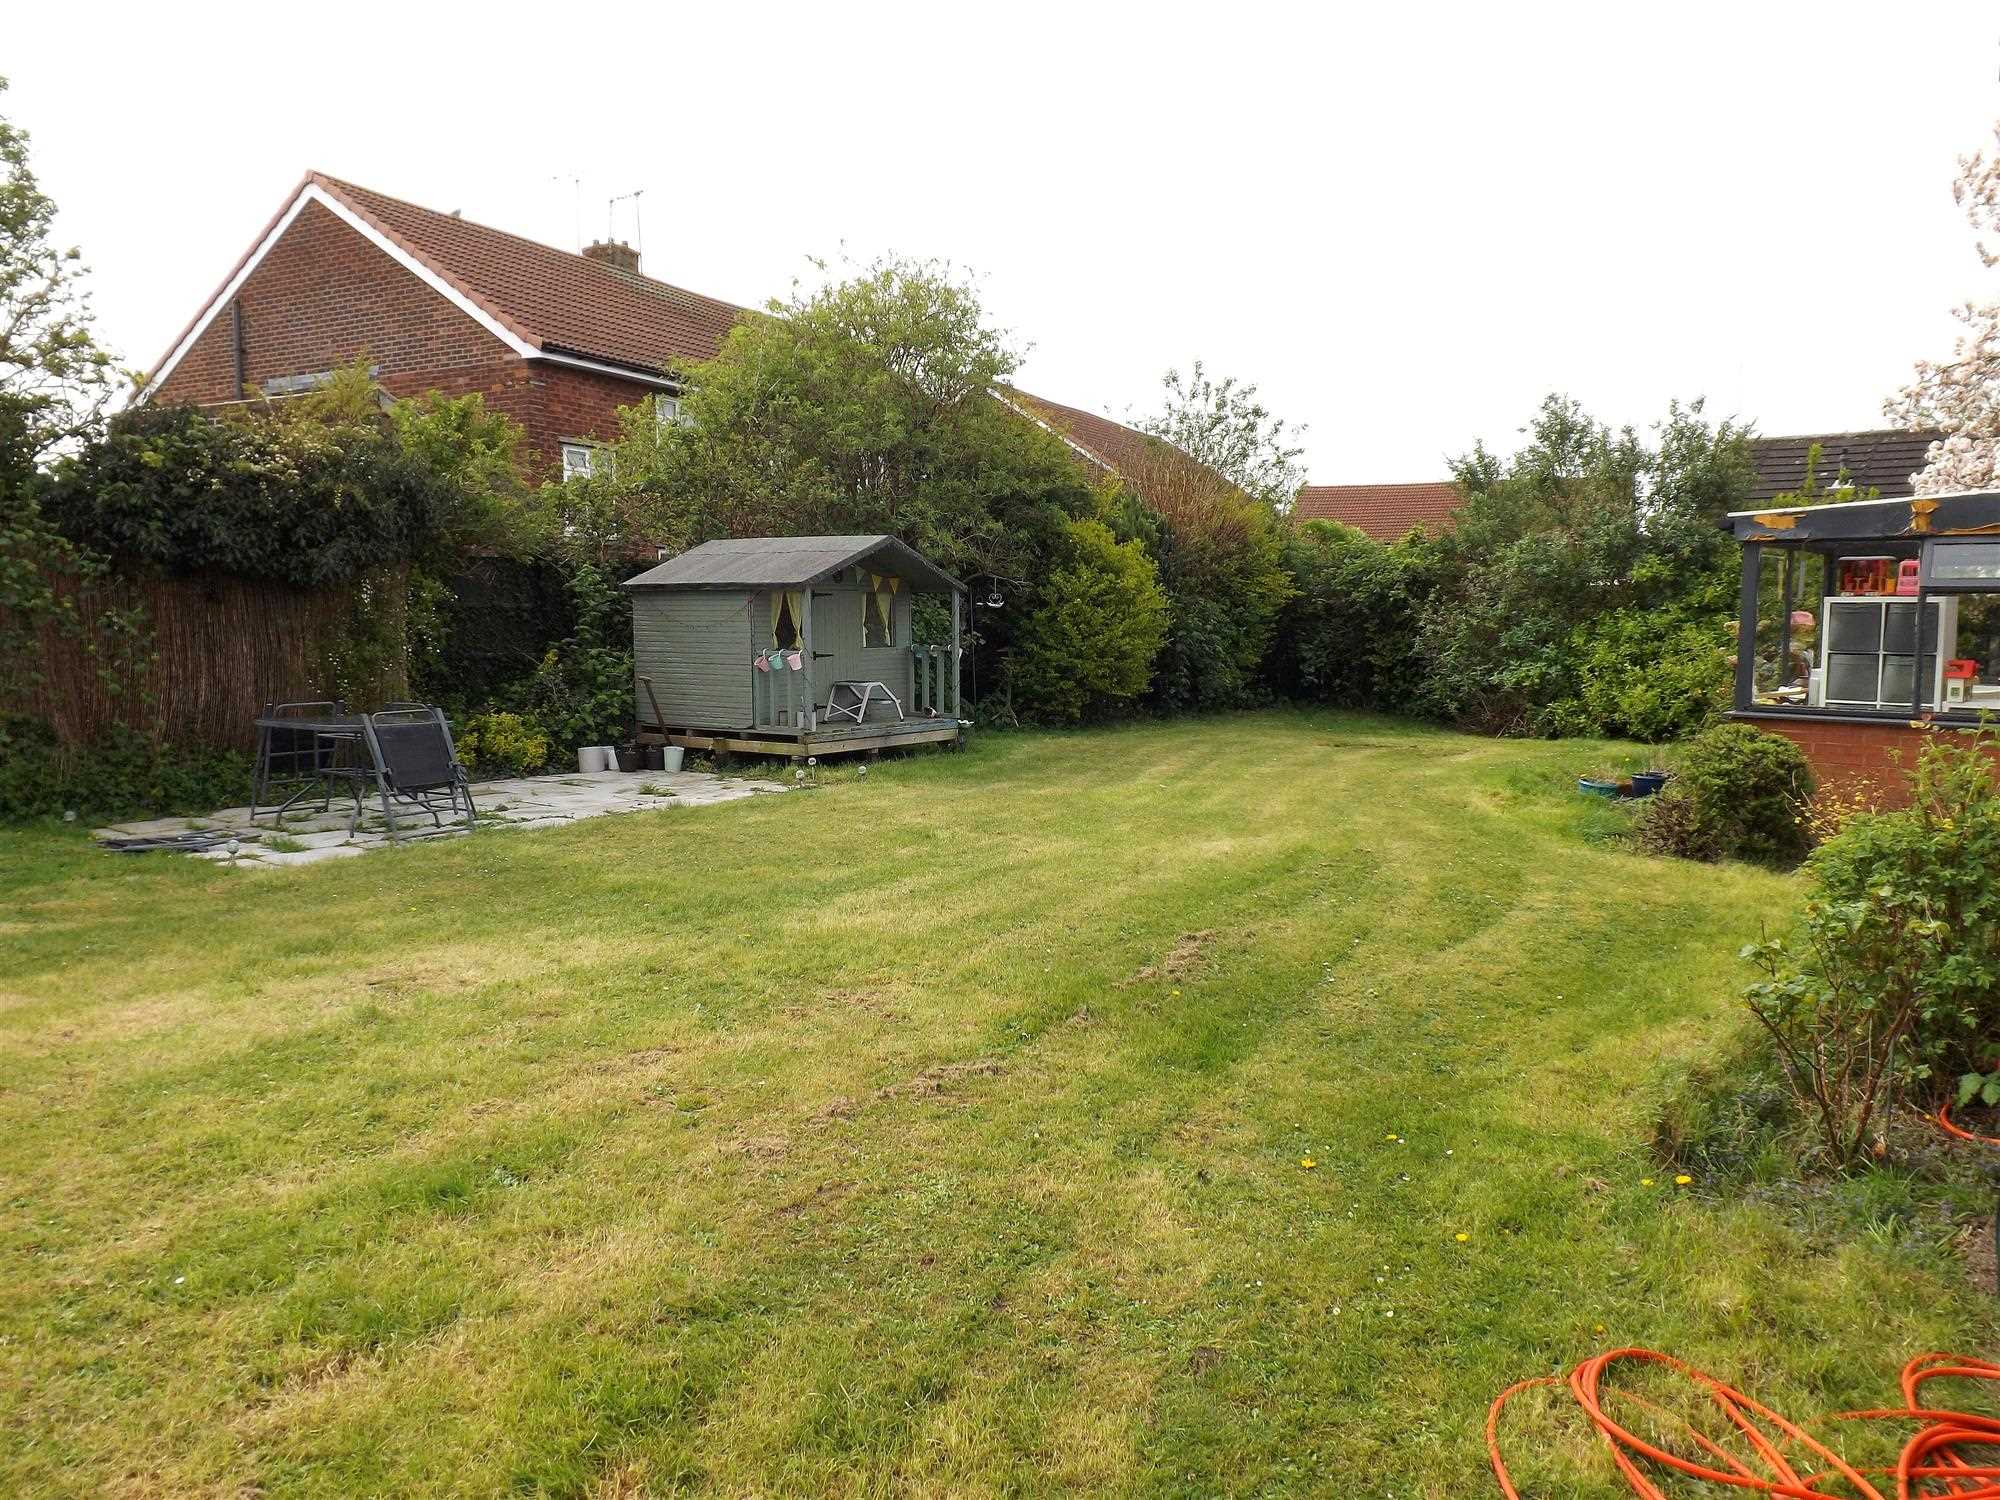 Field View, Hickinwood Lane - Picture 28